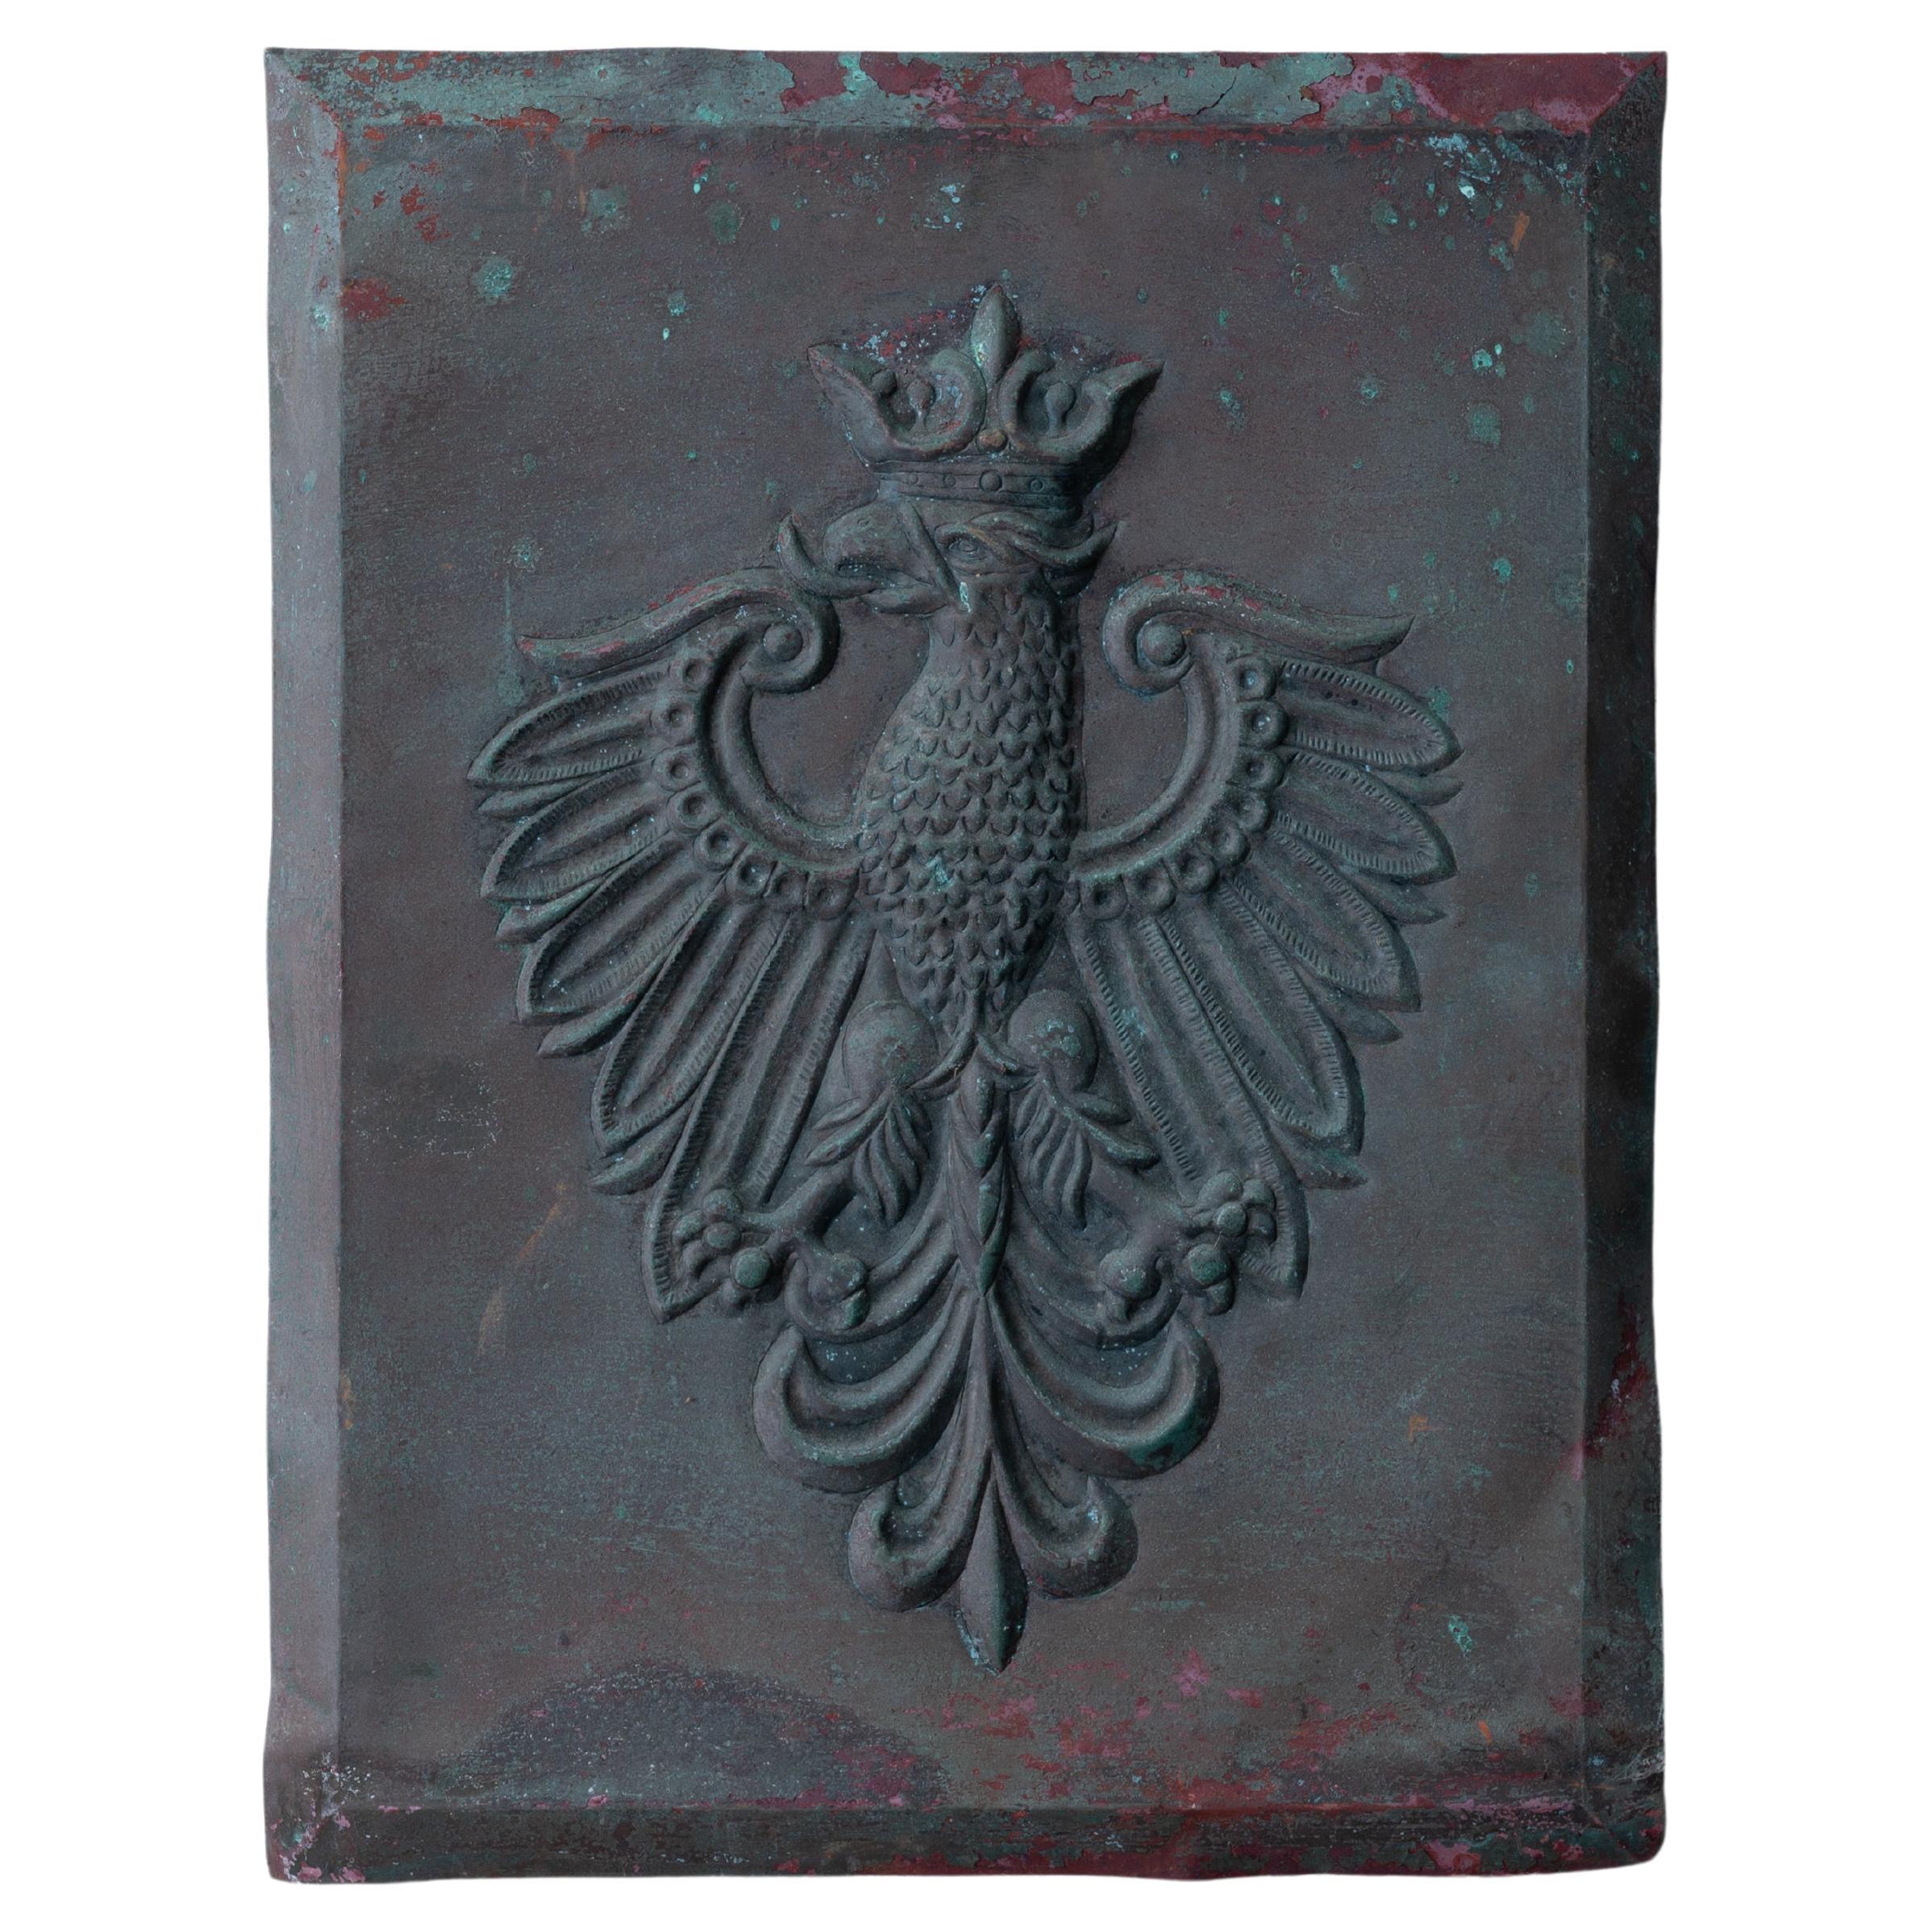 A vintage Polish coat of arms copper relief plaque, early 20th century.

16 ½ by 22 inches
